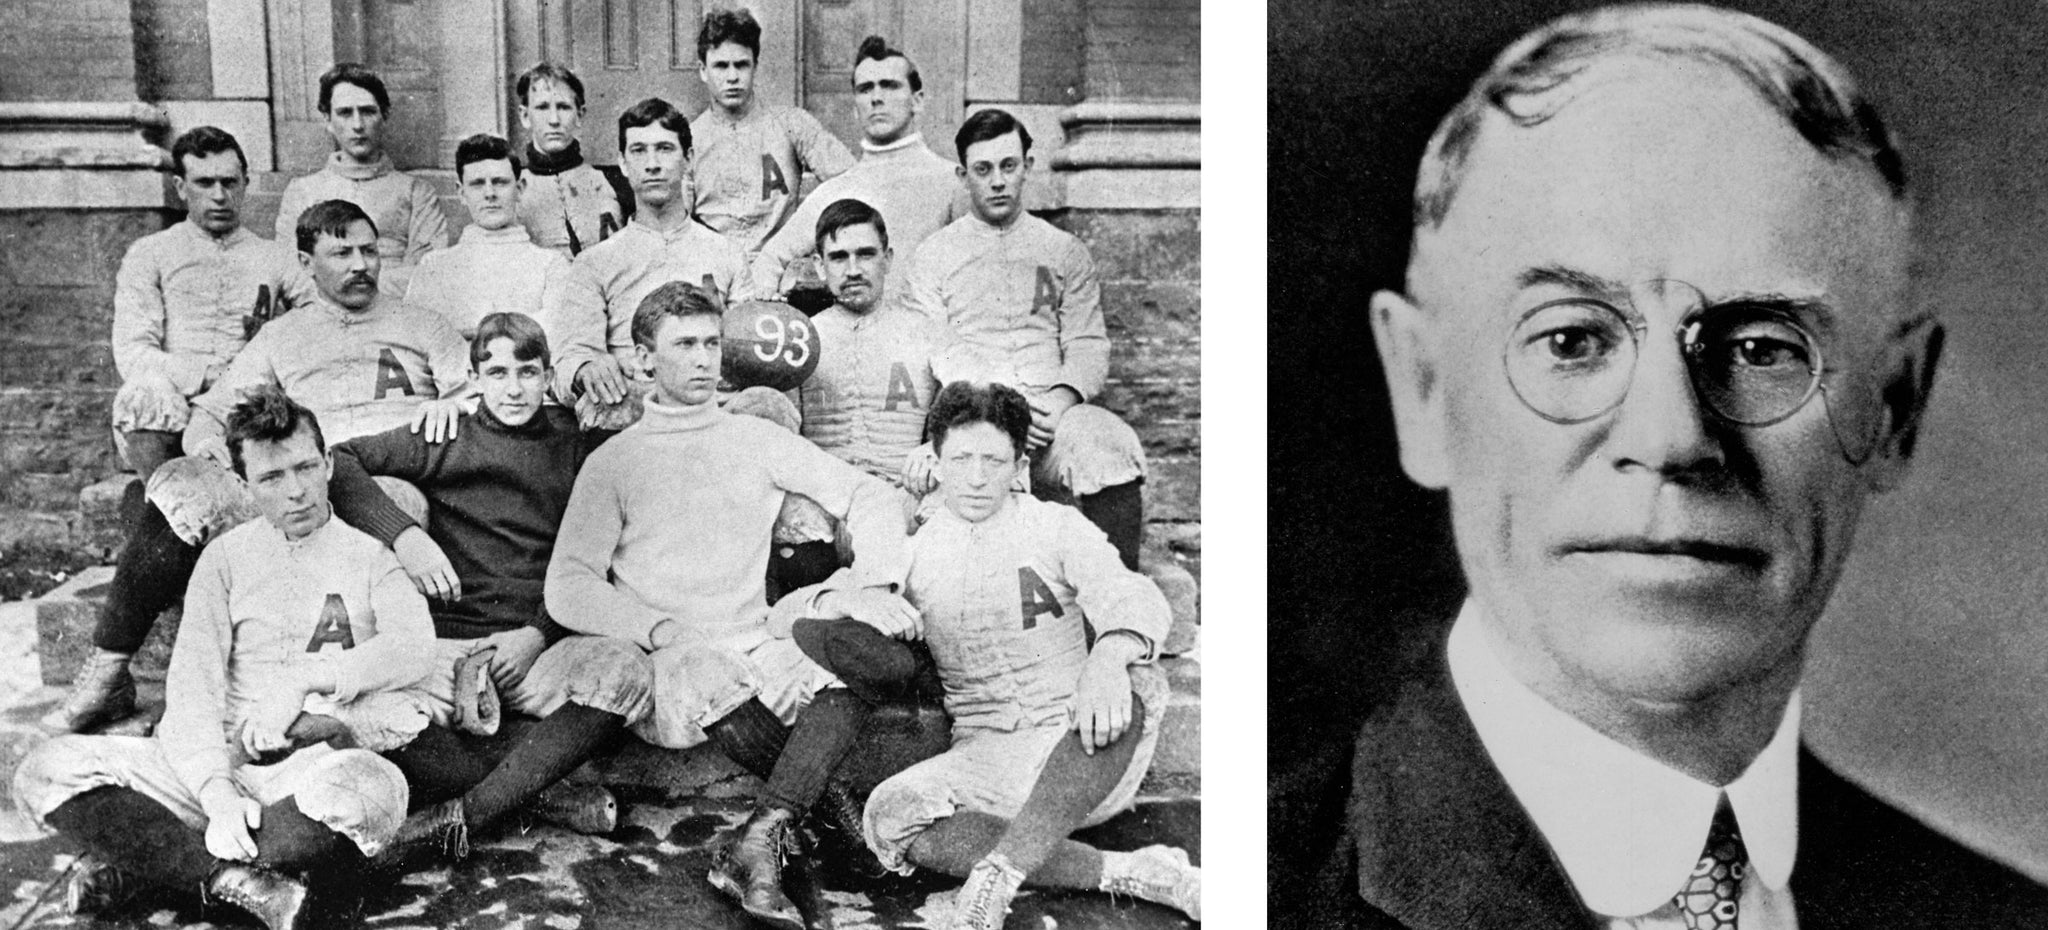 THE EARLY YEARS - Left: Allegheny College’s first football team, 1893. Right: John Heisman, circa 1910. -- Courtesy of the Meadville Tribune (left) and Crawford County Historical Society (right)